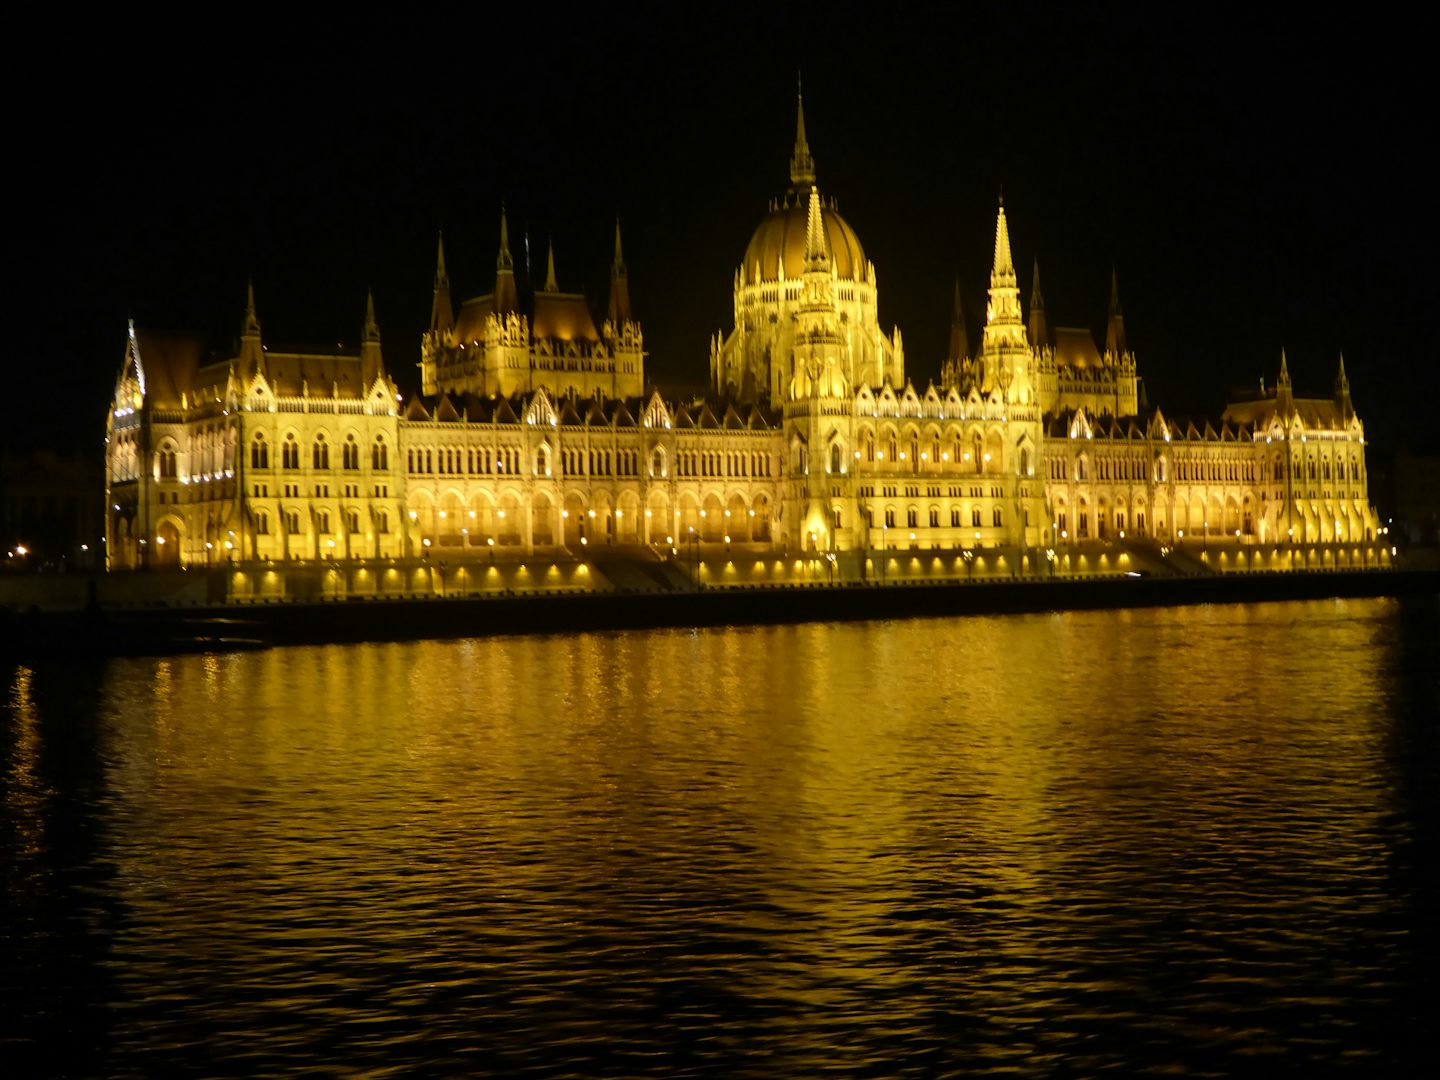 Budapest parliament cruise at night down the river.  Bring your blanket